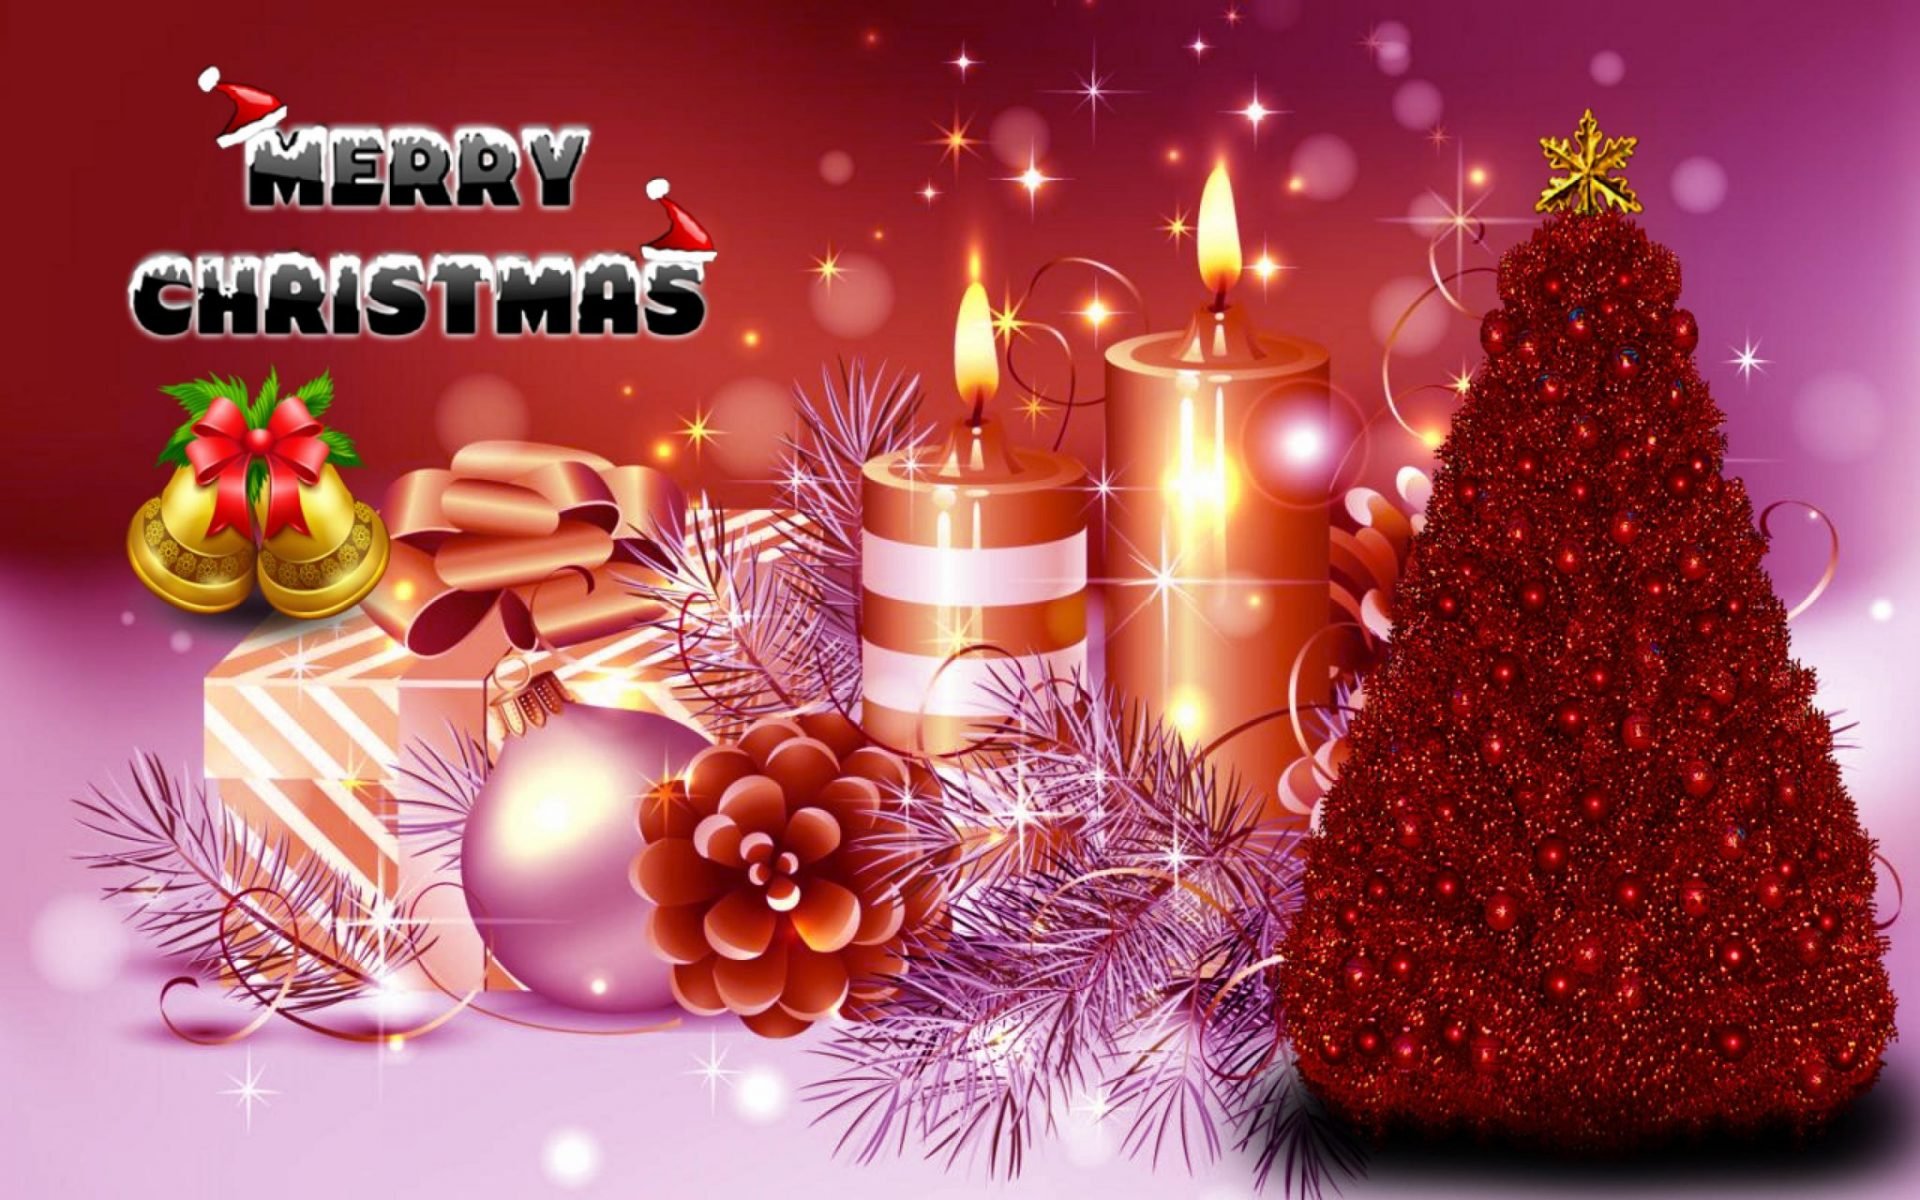 Greeting Card For New Year Christmas Tree Candles Bells Gifts Ornaments Desktop Wallpapers Hd Resolution 2880x1800 : Wallpapers13